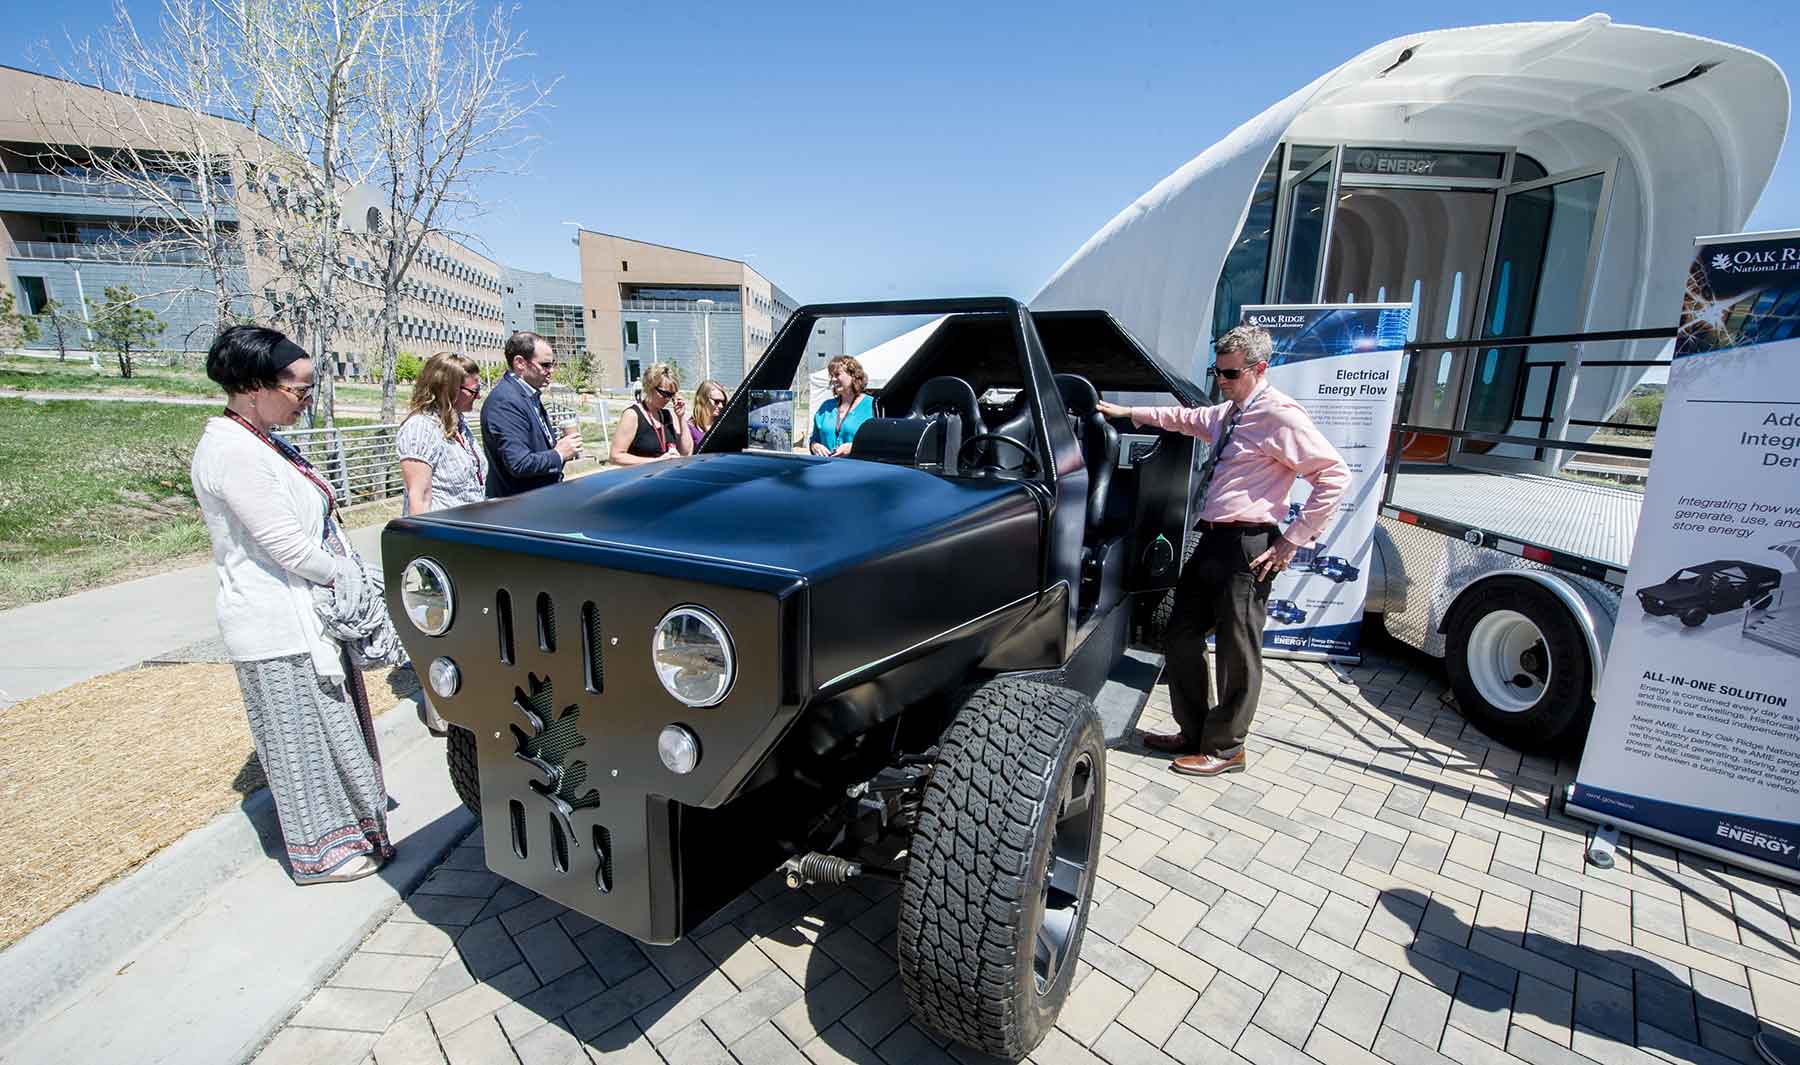 People stand next to a 3D-printed vehicle and house that were exhibited at the summit.